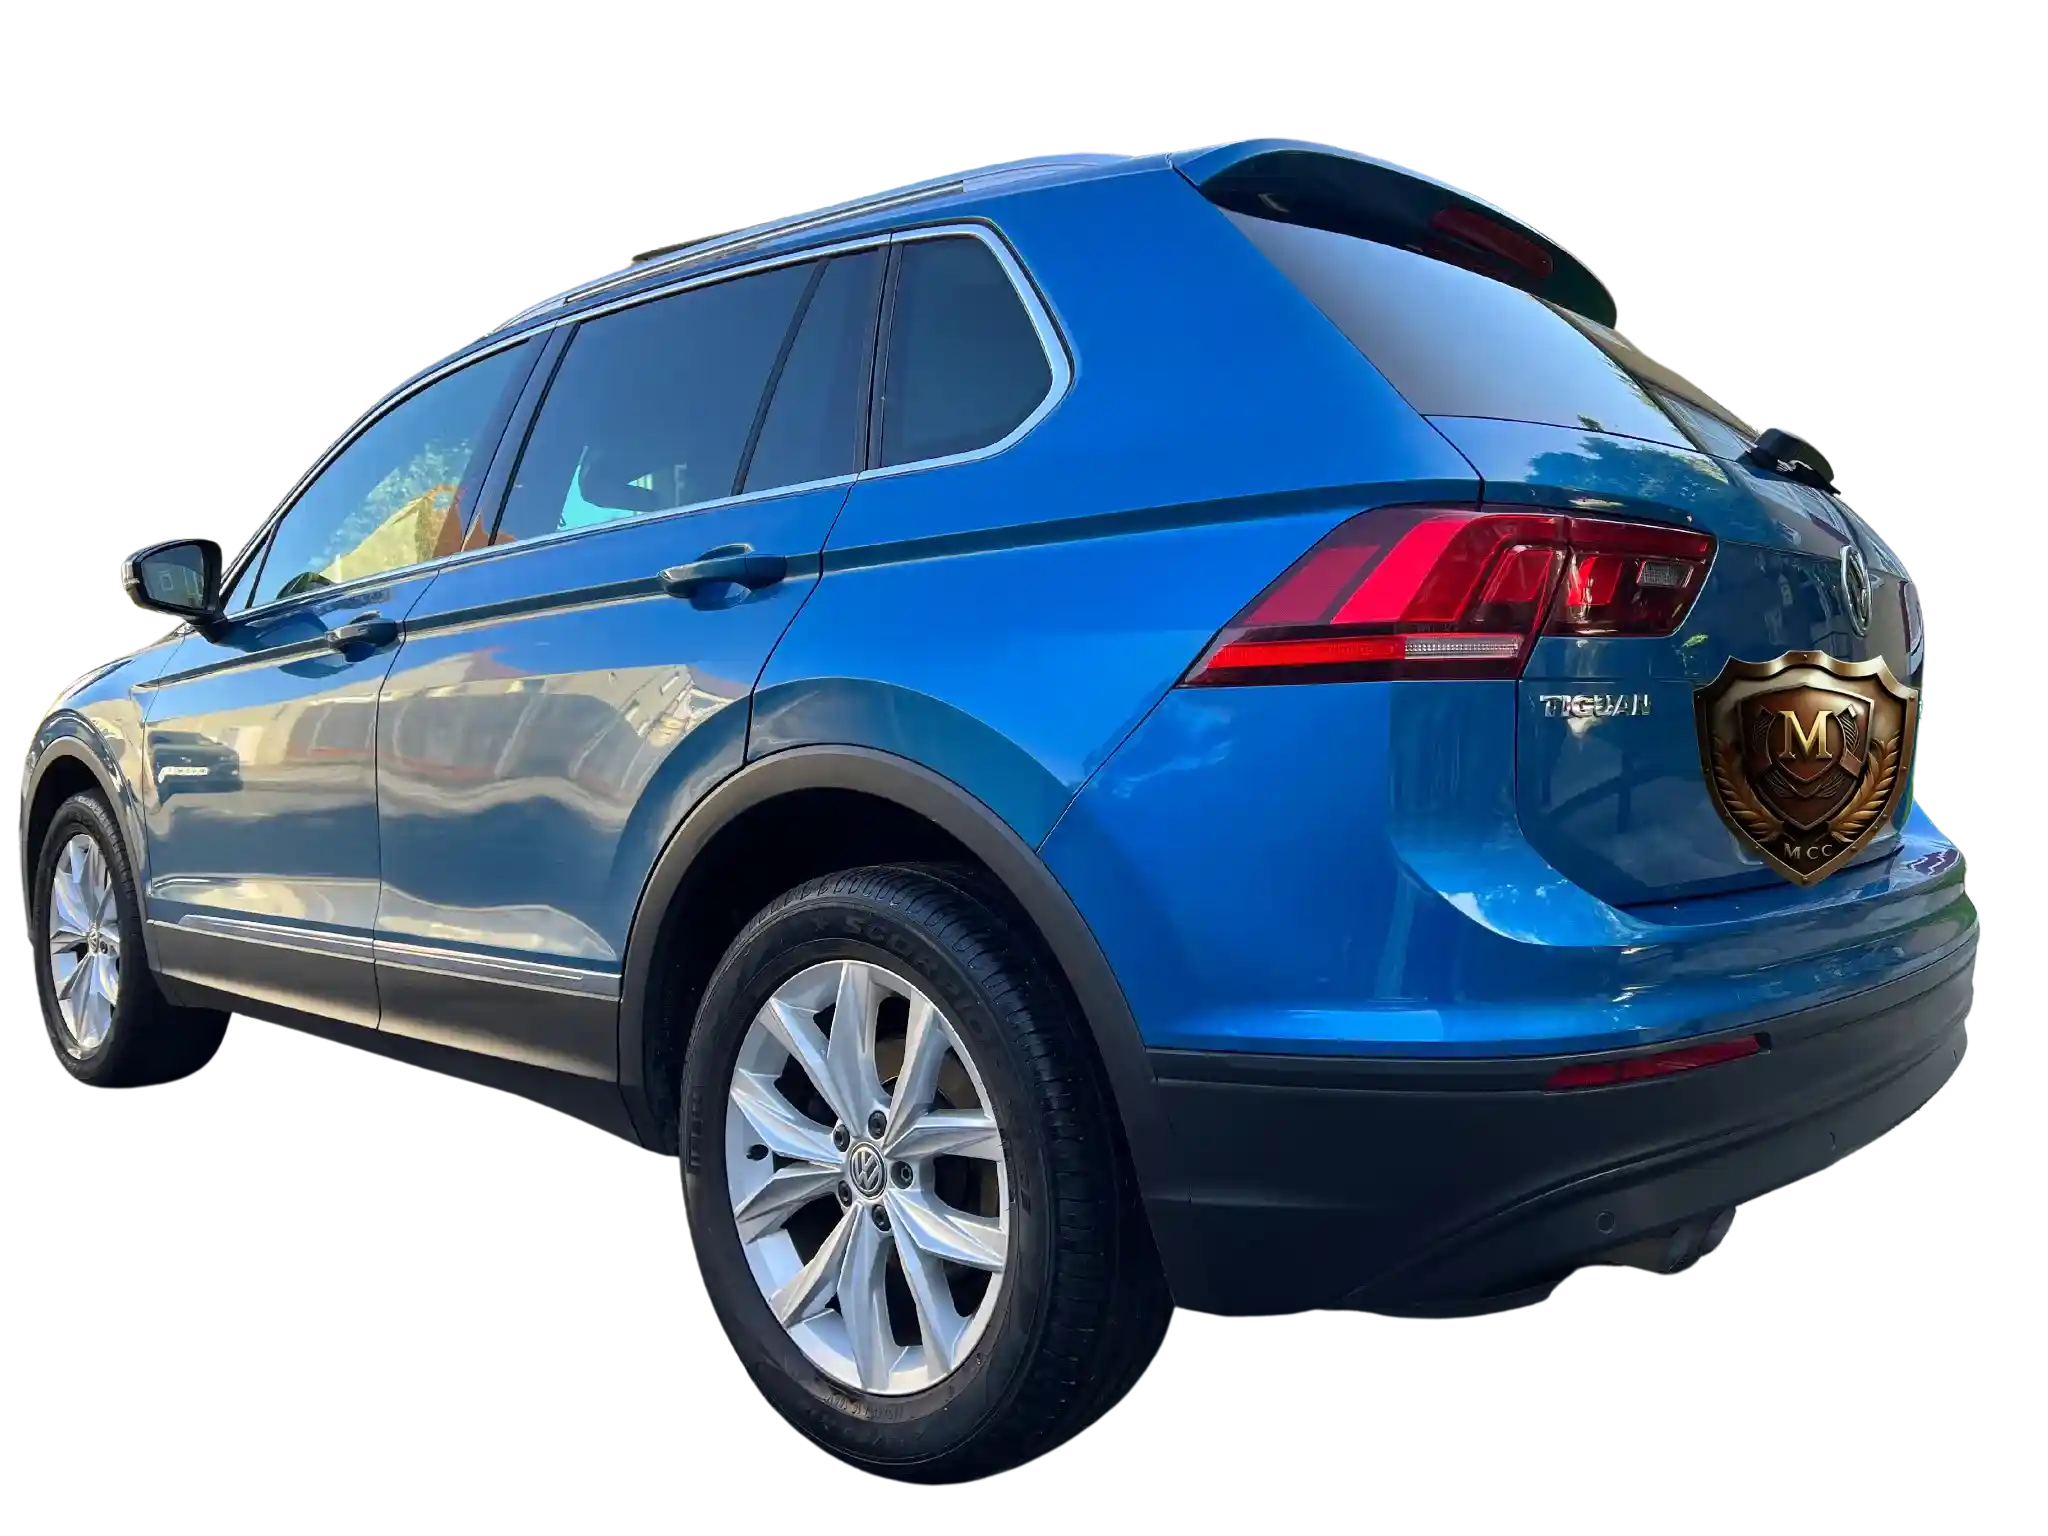 Eco-friendly waterless valeting of a Volkswagen Tiguan 4Motion in Weybridge, enhancing its rugged elegance and reflecting corporate environmental values.